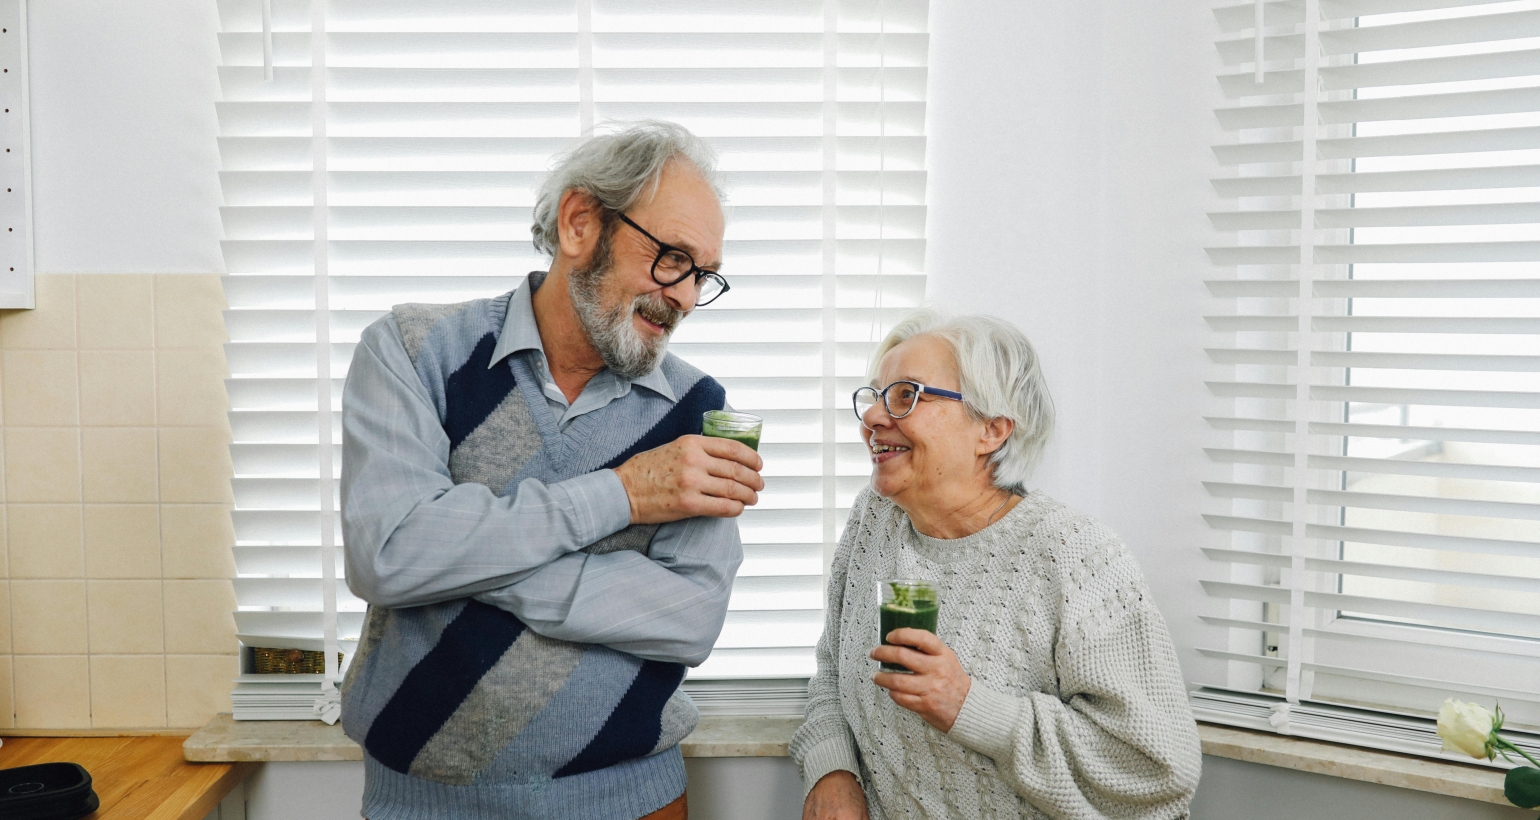 The Nutritional Benefits Of Smoothies For Seniors